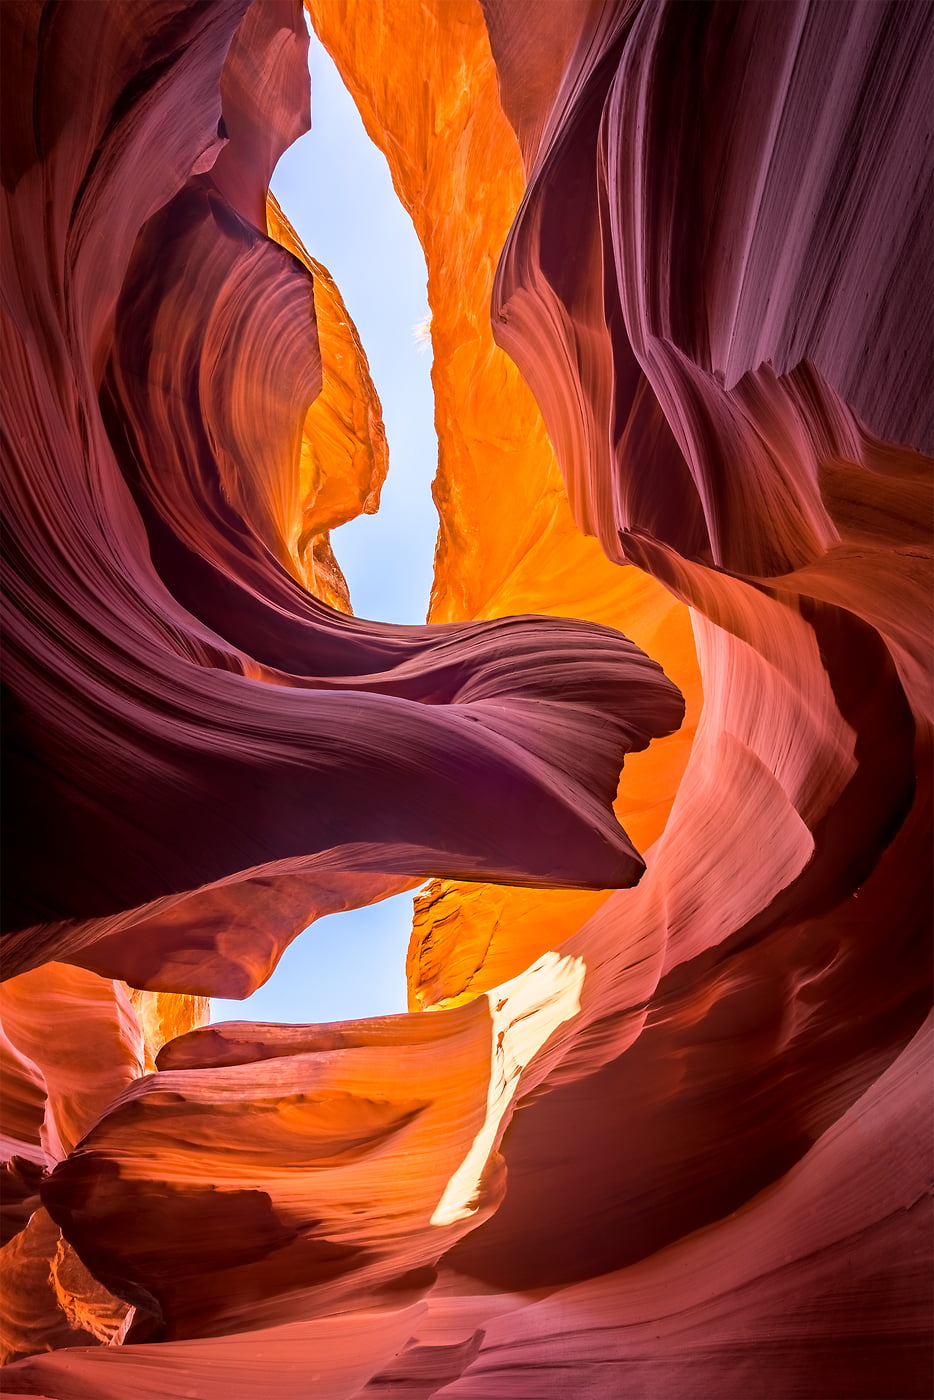 165 megapixels! A very high quality, large-format VAST photo print of Antelope Canyon; fine art nature photo created by Justin Katz in Arizona.